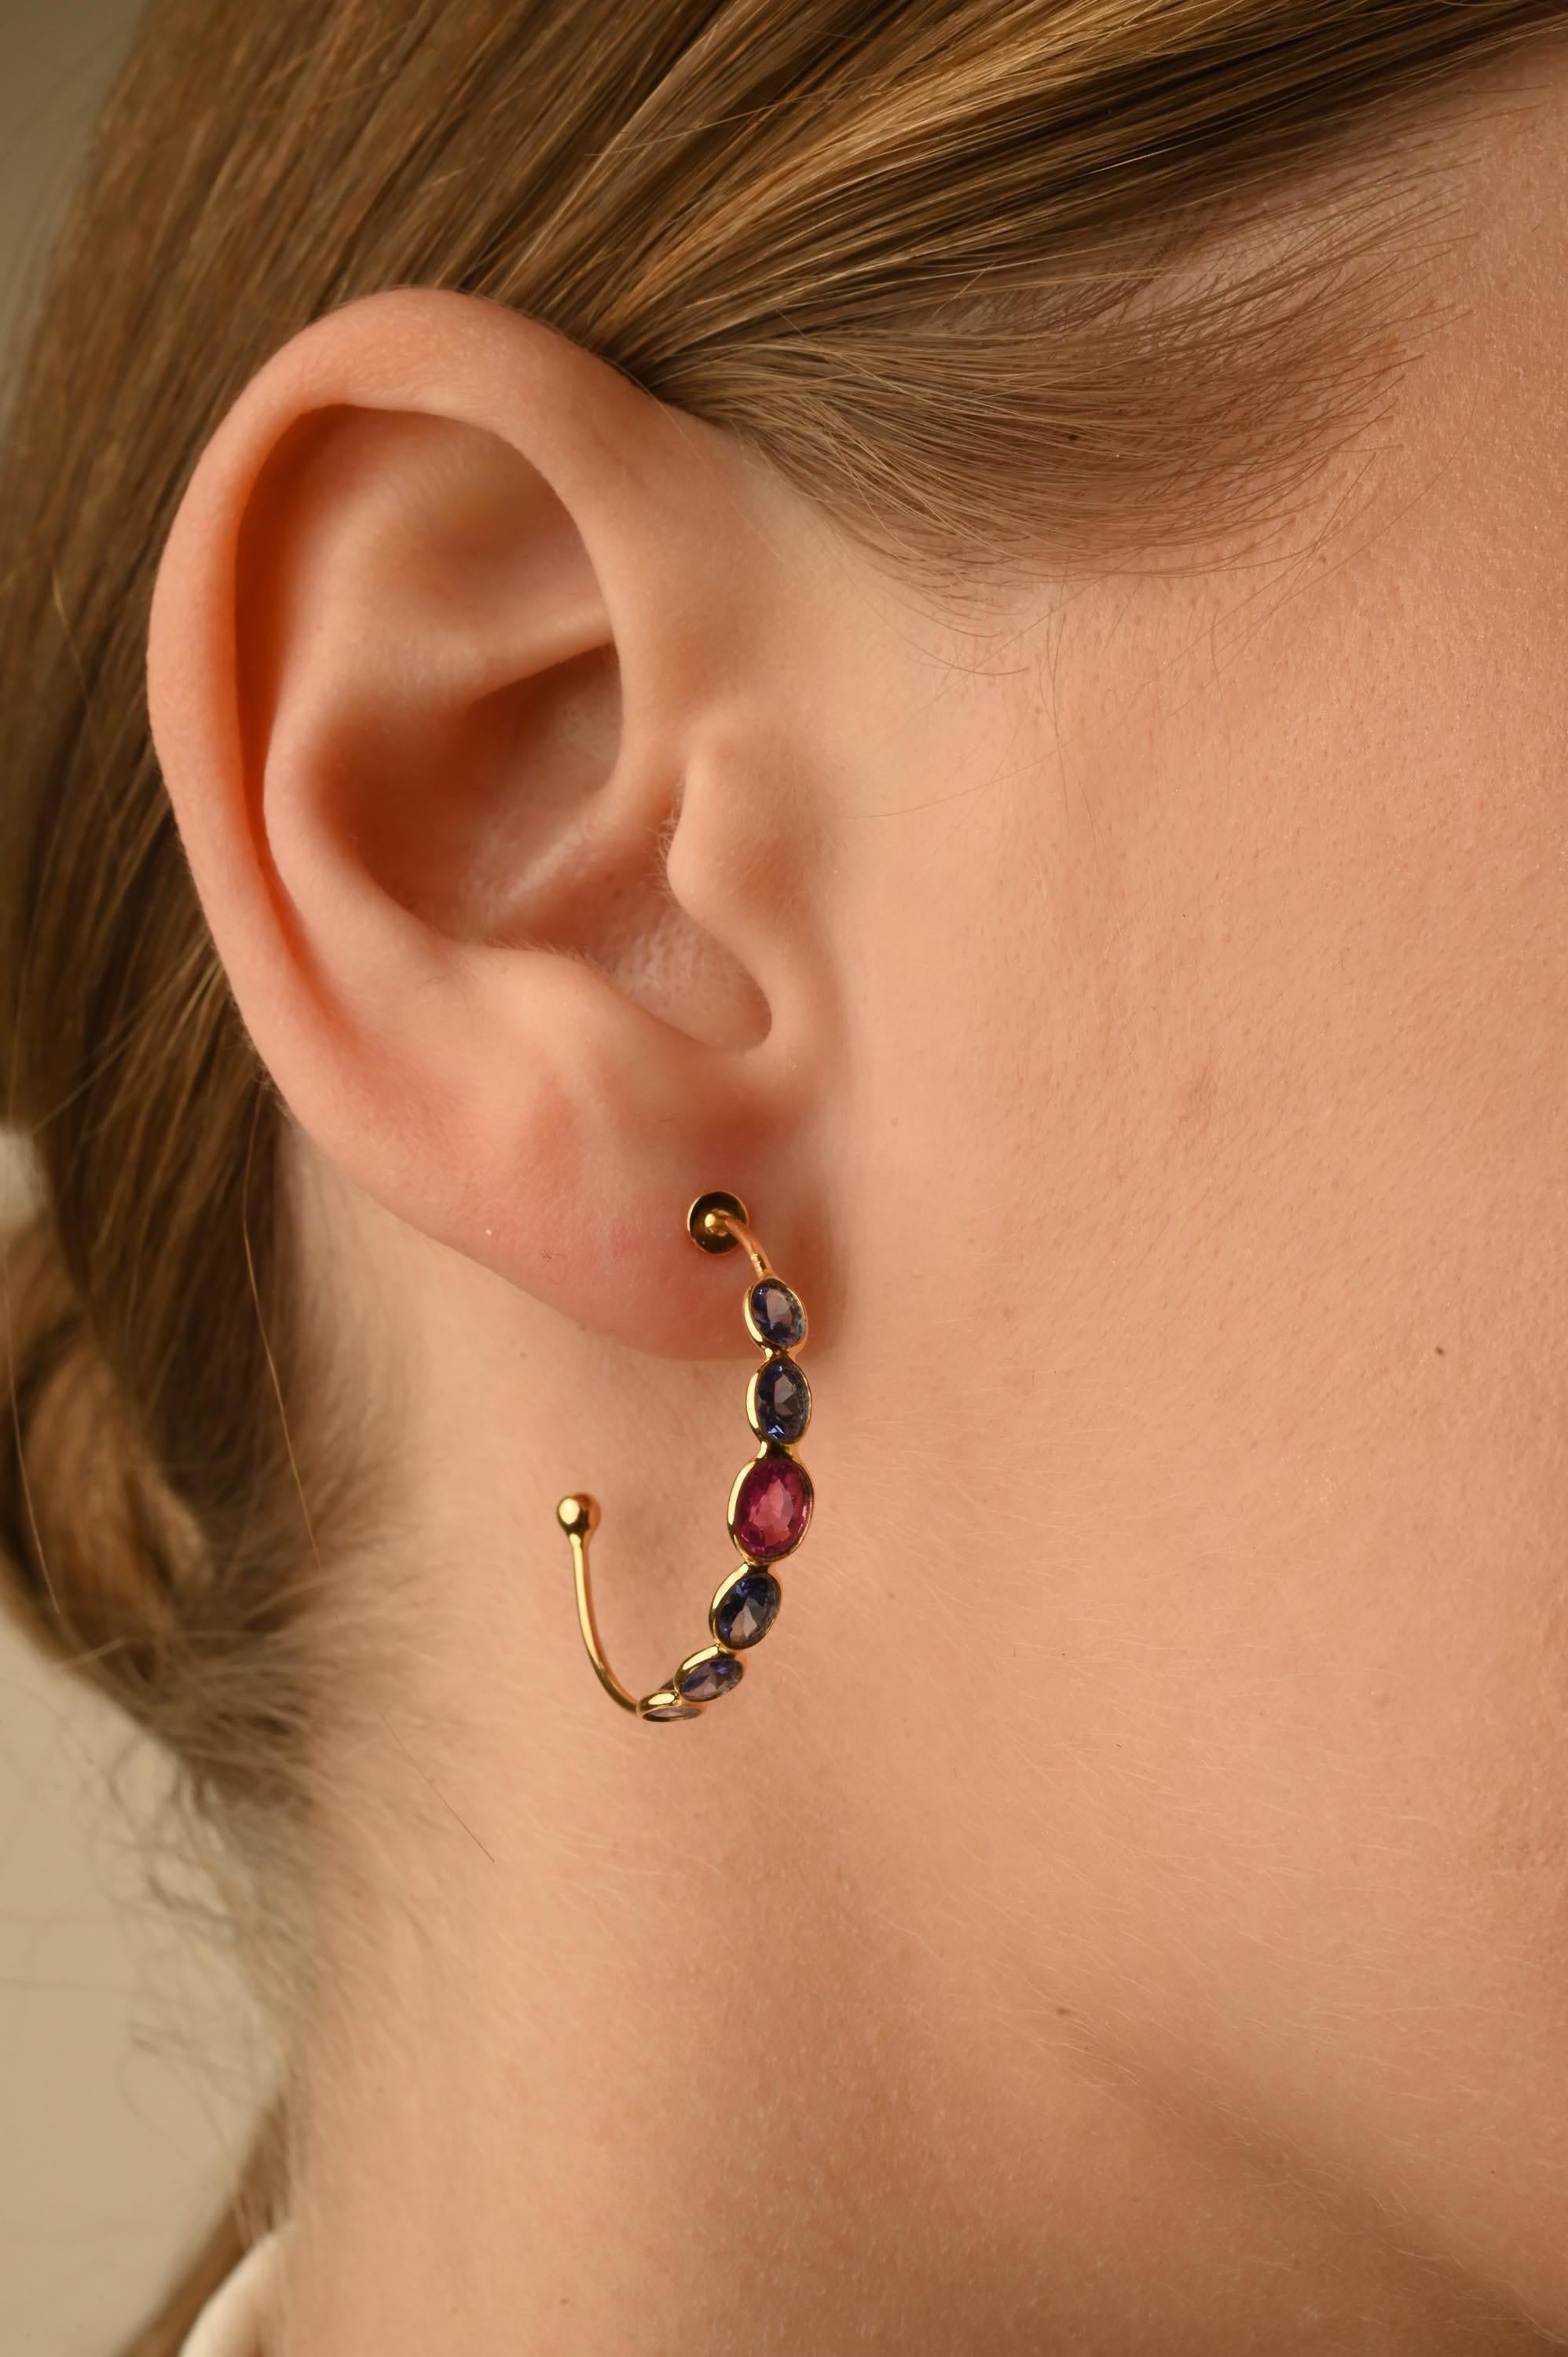 14k Solid Yellow Gold Mounted Multi Sapphire Hoop Earrings Gift for Her For Sale 1